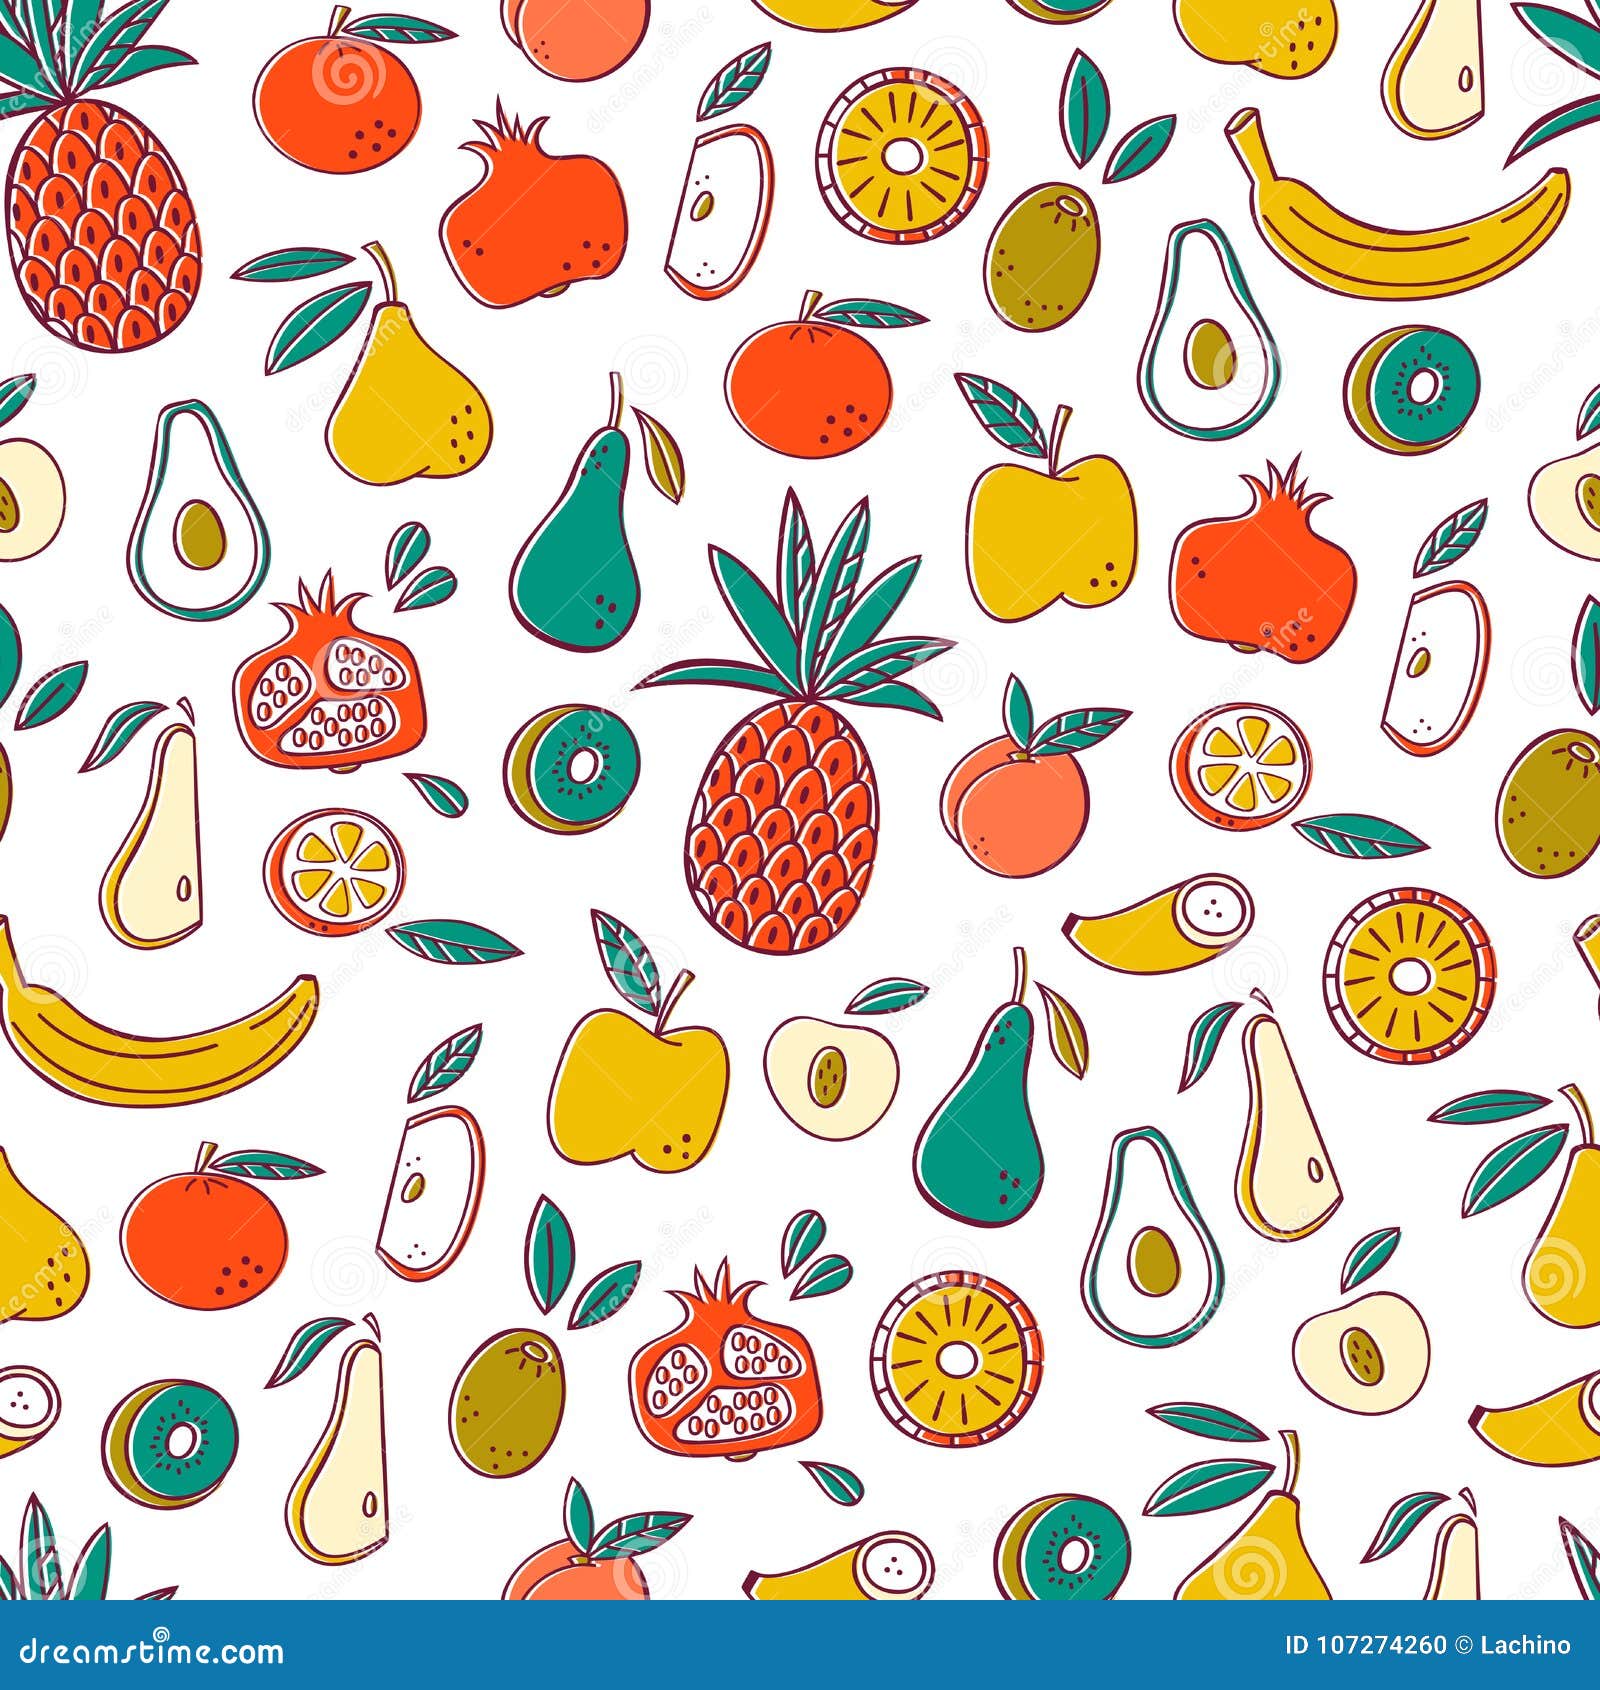 Download 1000+ Fruit vector background Designs for commercial use